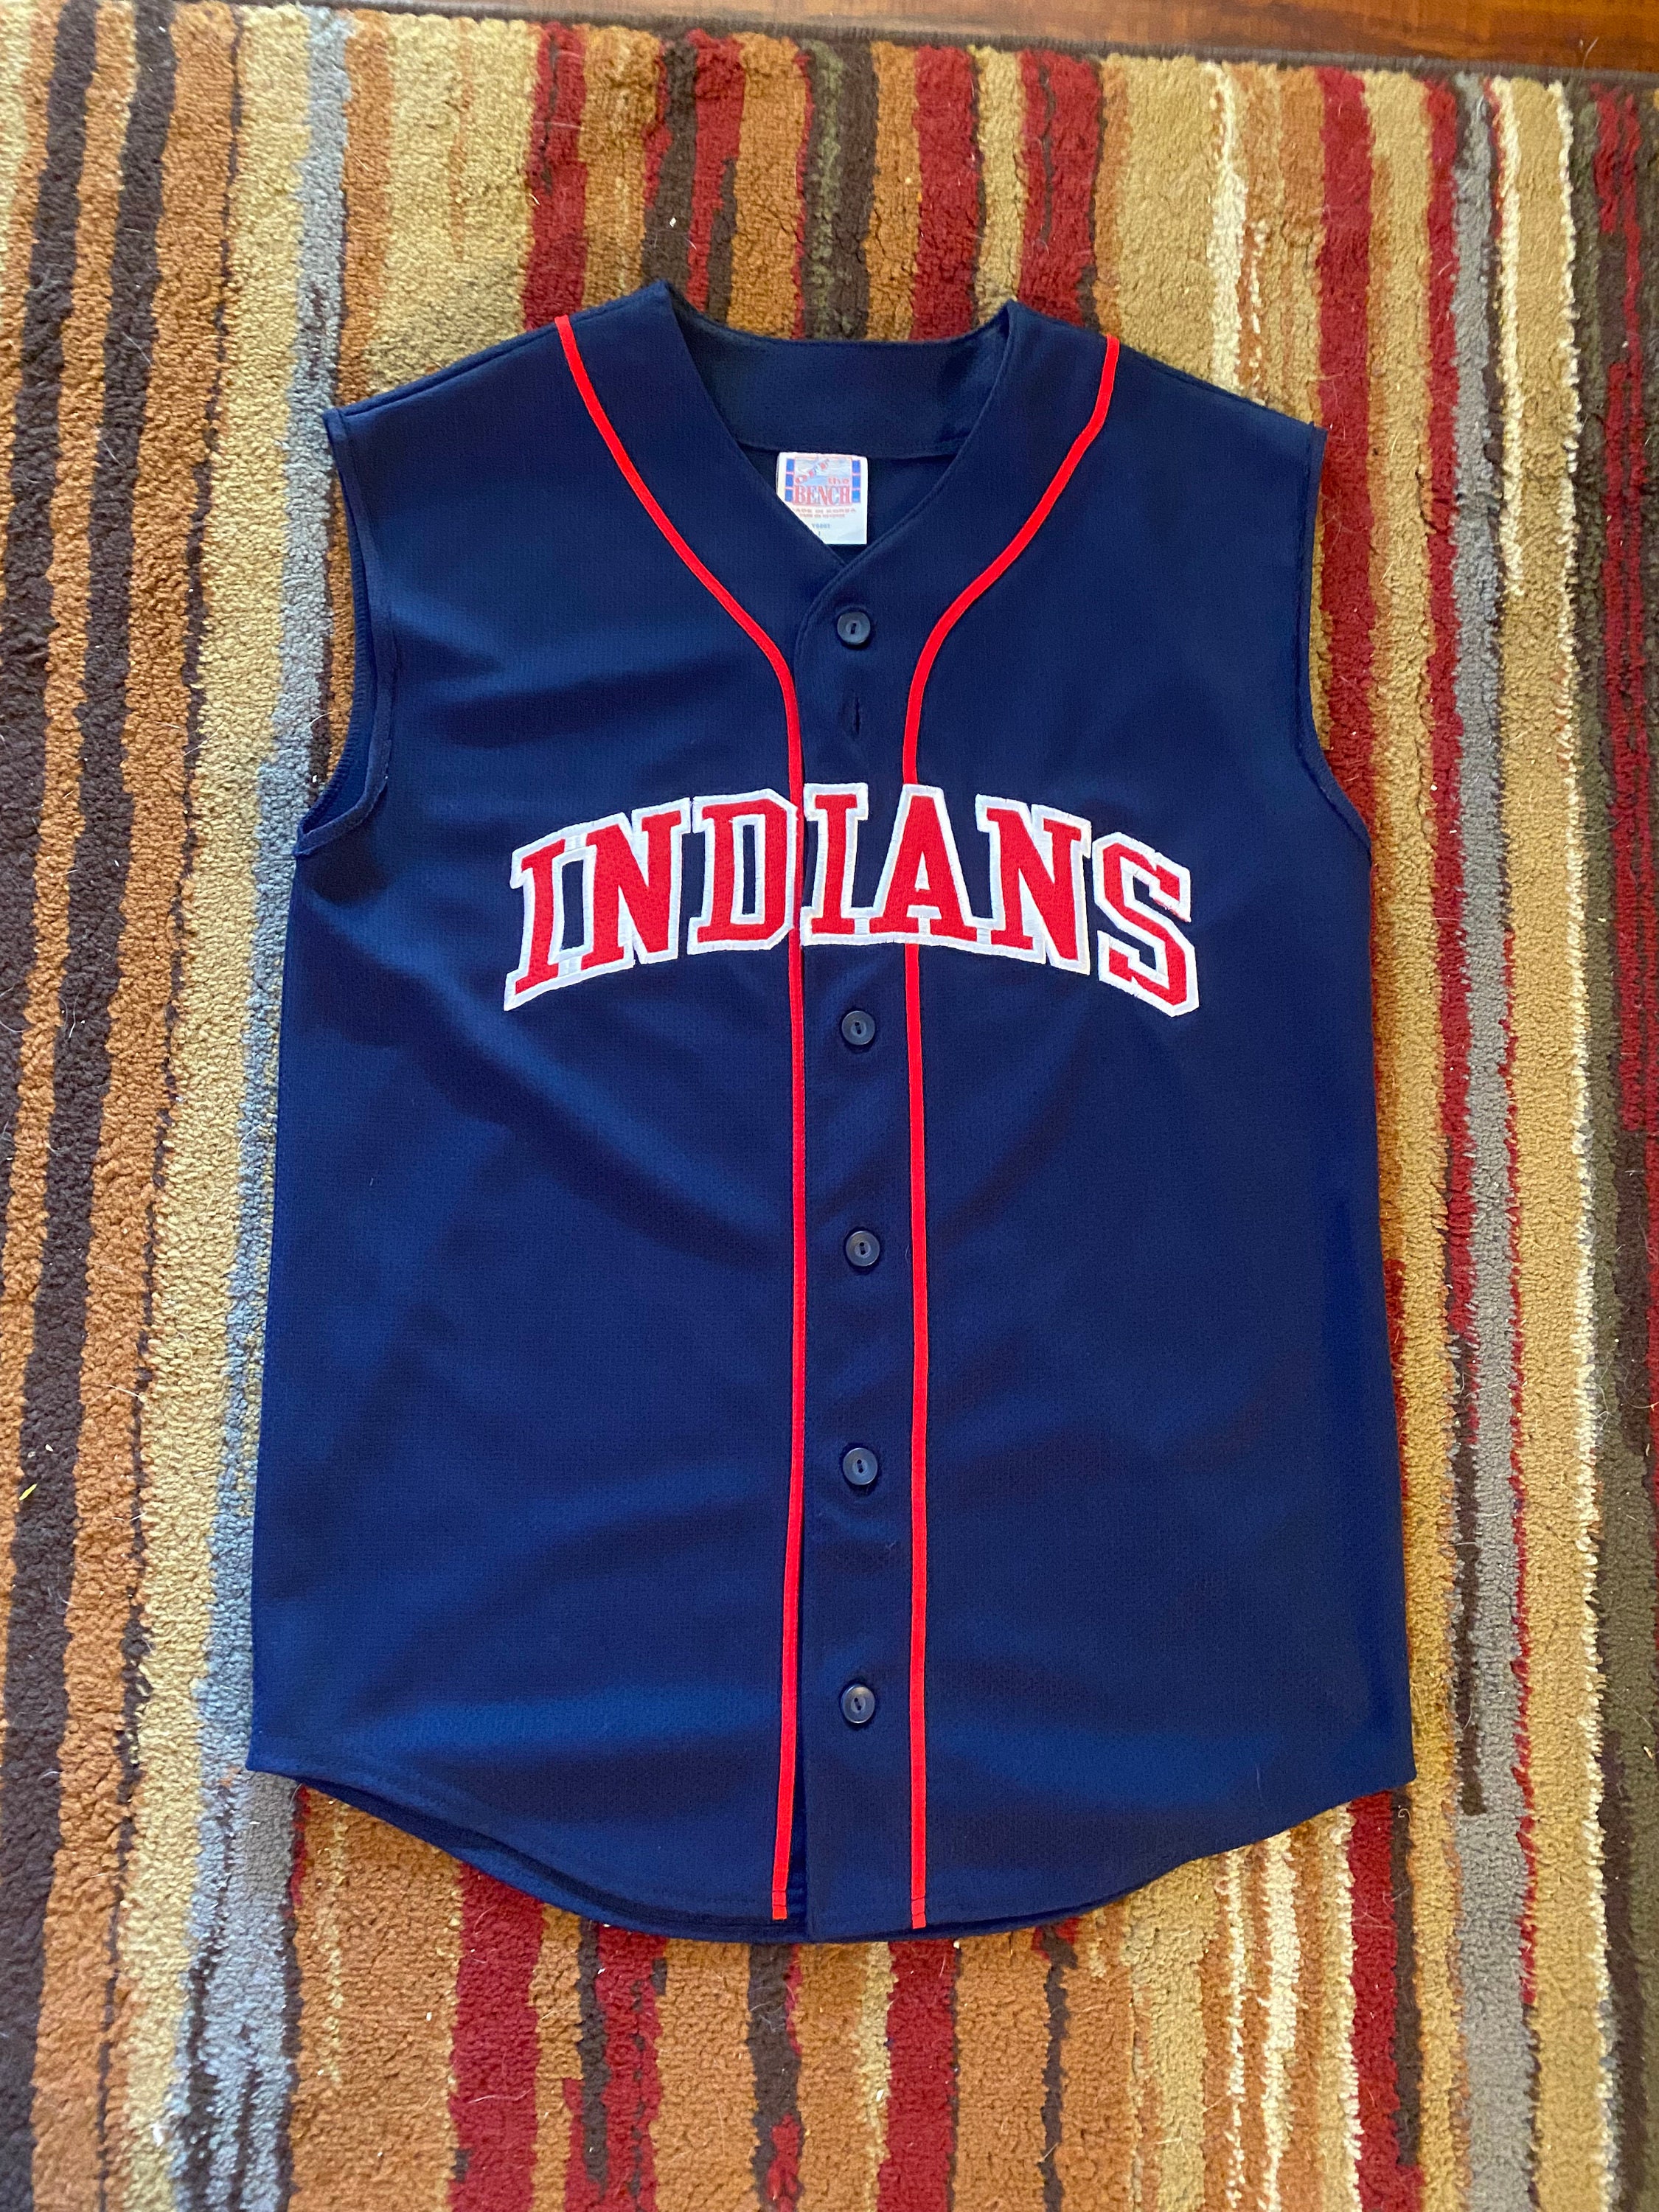 Cleveland Indians Sz. 18-20 Stitched No Name Jersey Russell Athletic  Baseball